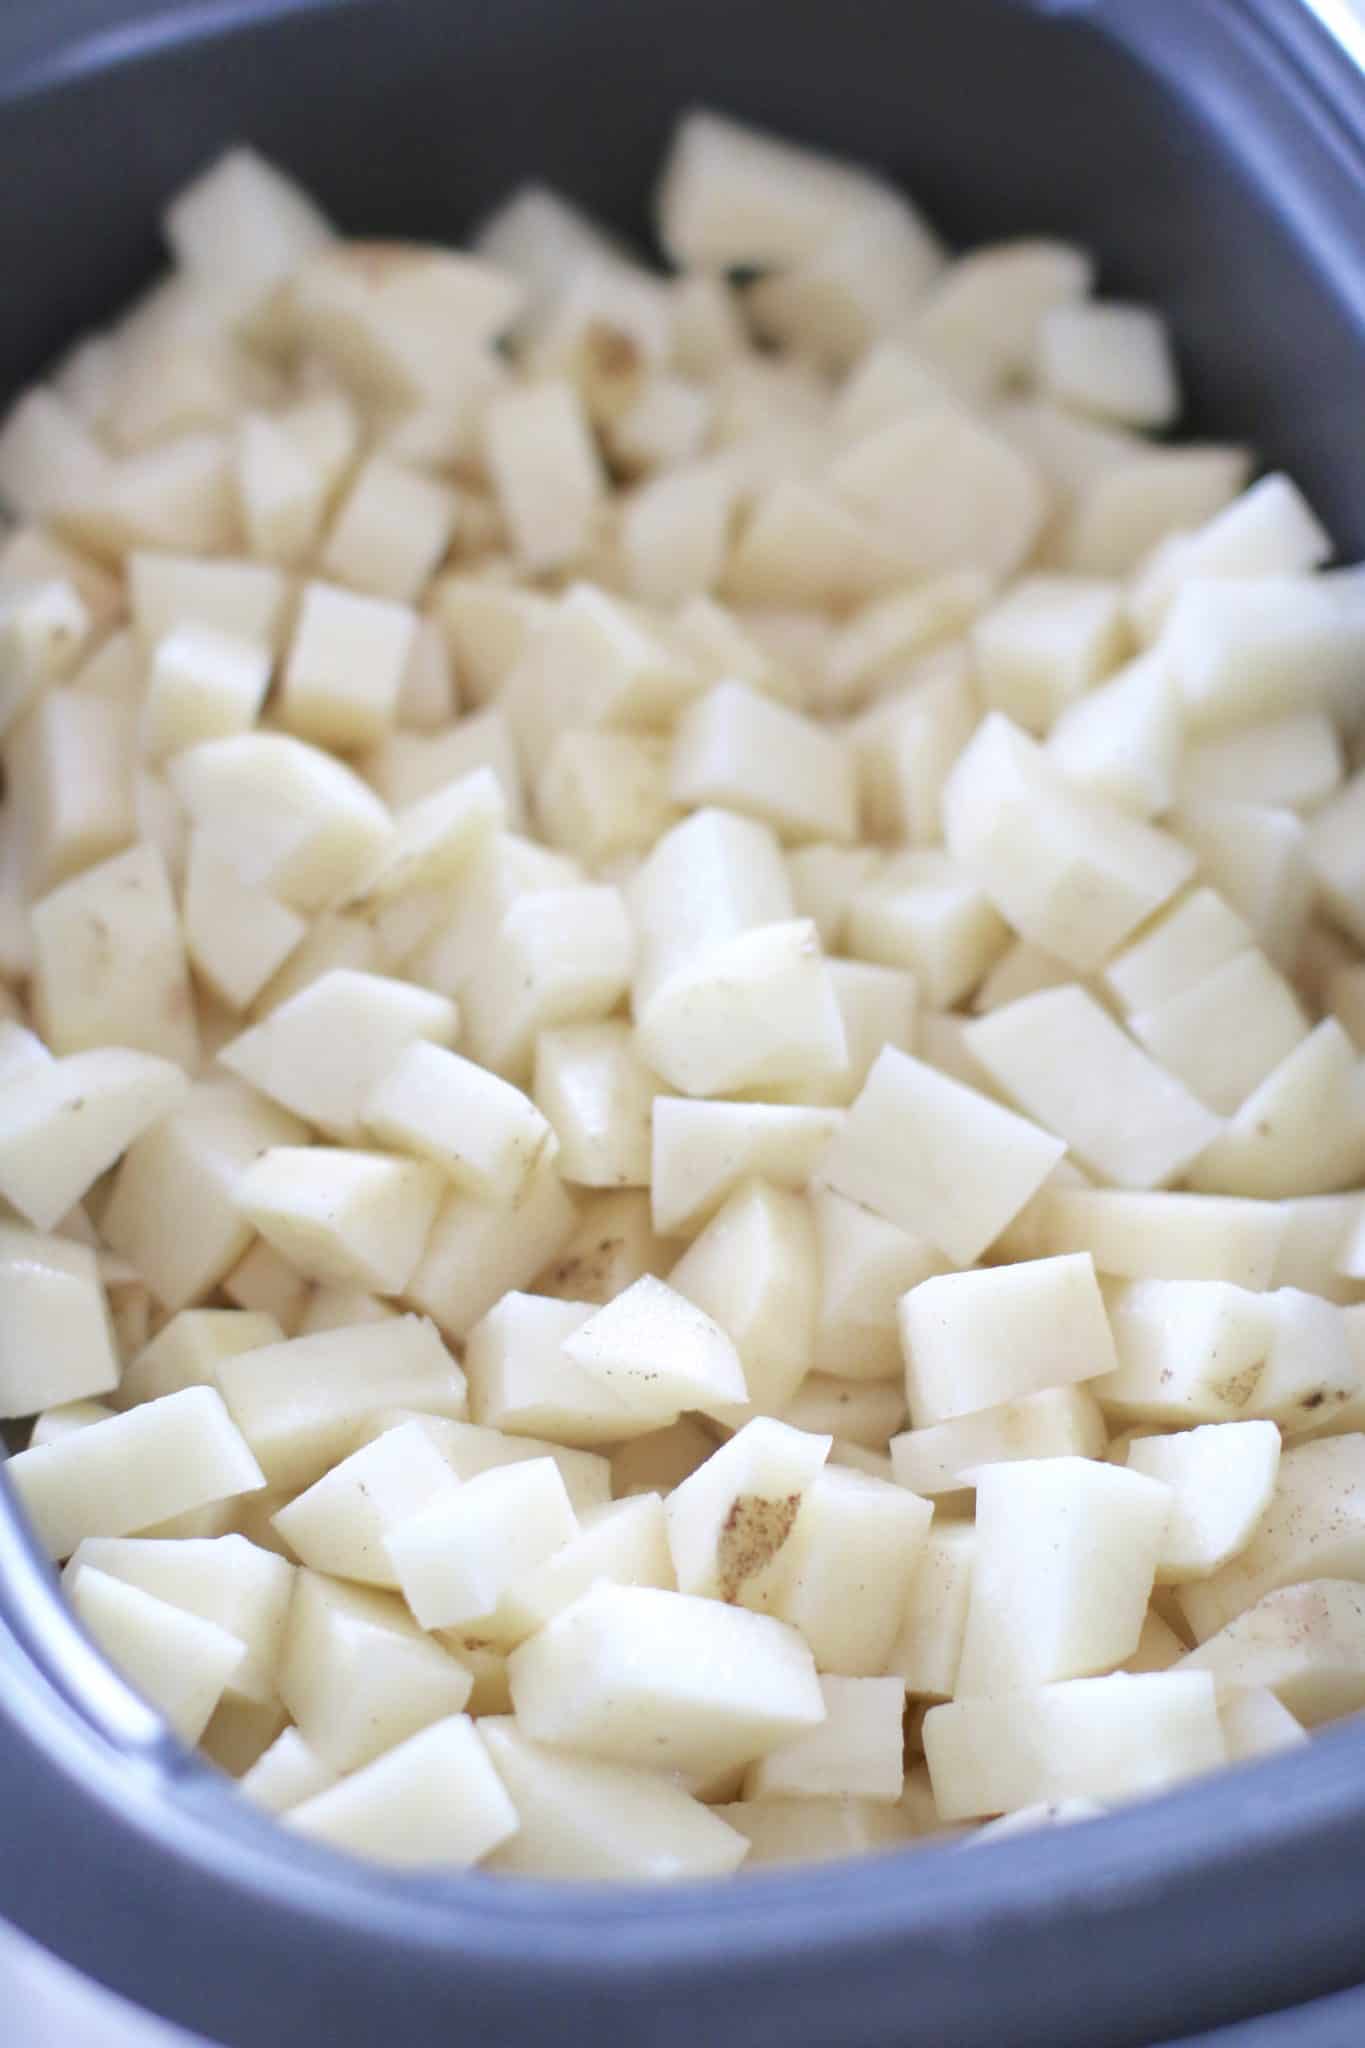 diced potatoes shown in an oval slow cooker.